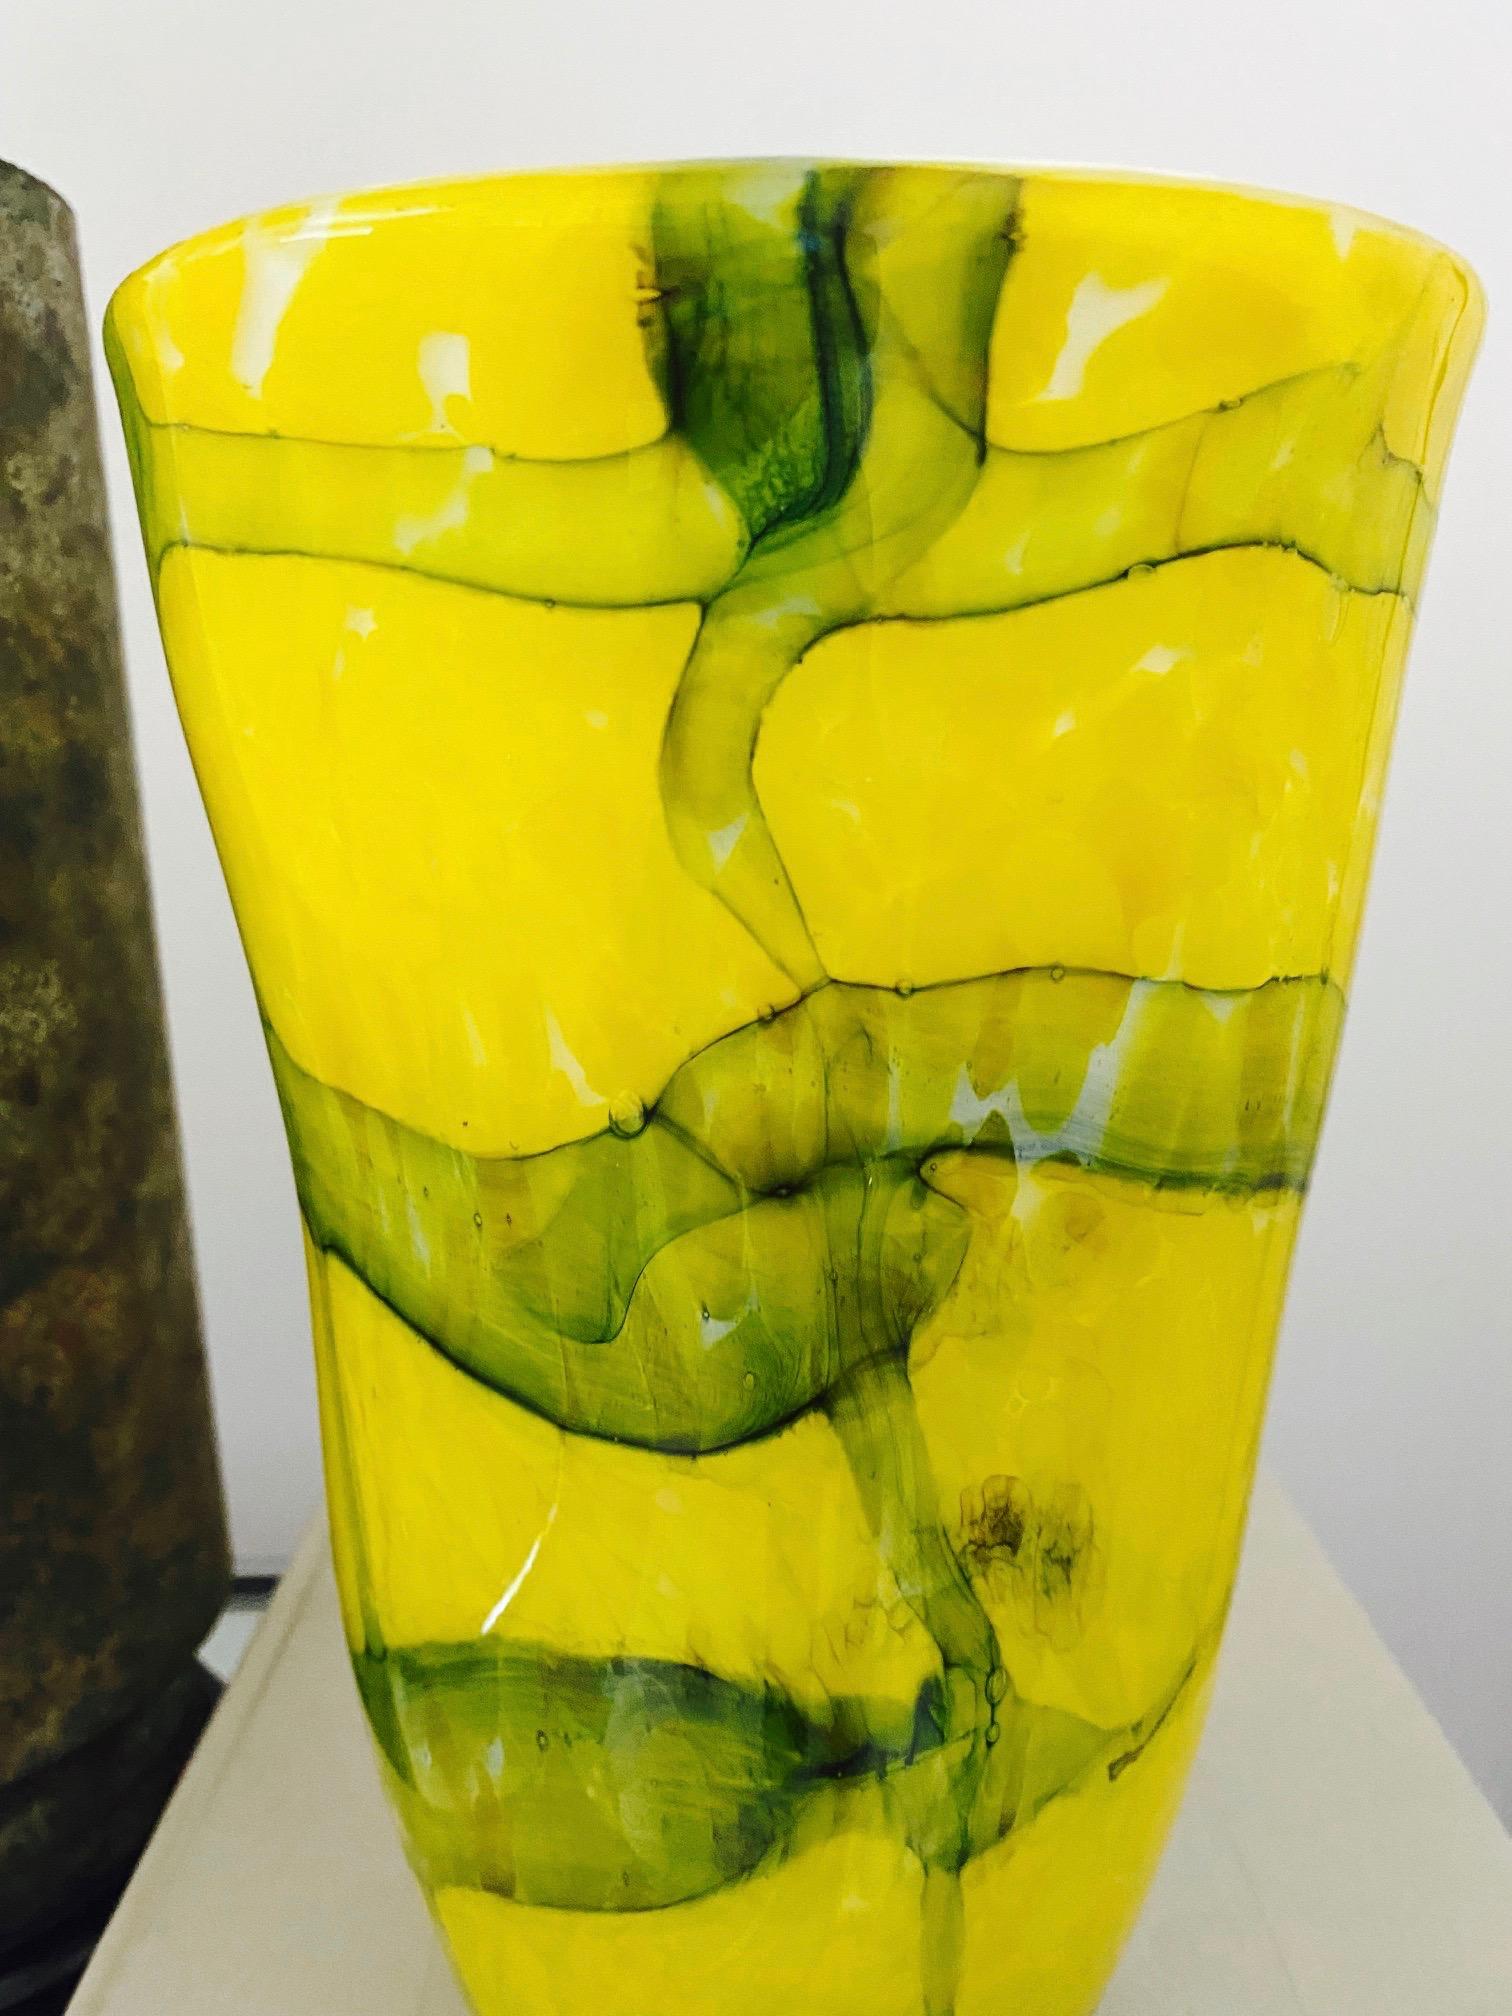 Abstract Murano Glass Vase by Fratelli Toso in Yellow and Green, c. 1980 In Good Condition For Sale In Fort Lauderdale, FL